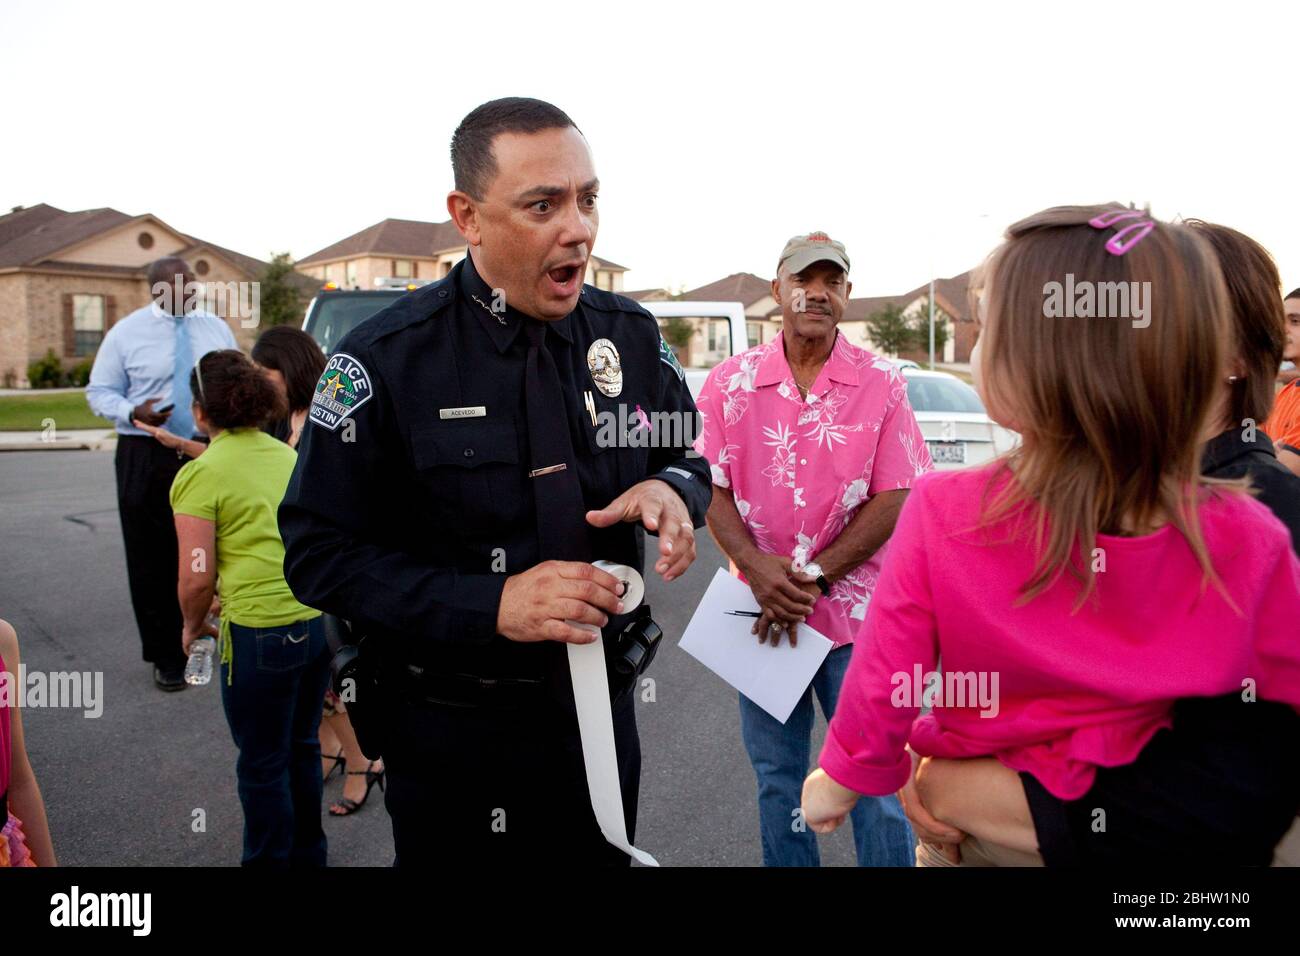 Austin Texas USA, October 5, 2010: Austin Police Chief Art Acevedo greets residents of a far south Austin neighborhood during National Night Out, a national anti-crime effort aimed at keeping neighborhoods vibrant and safe. Dozens of groups met throughout the city to heighten awareness of crime prevention and foster better police community relations. ©Bob Daemmrich Stock Photo